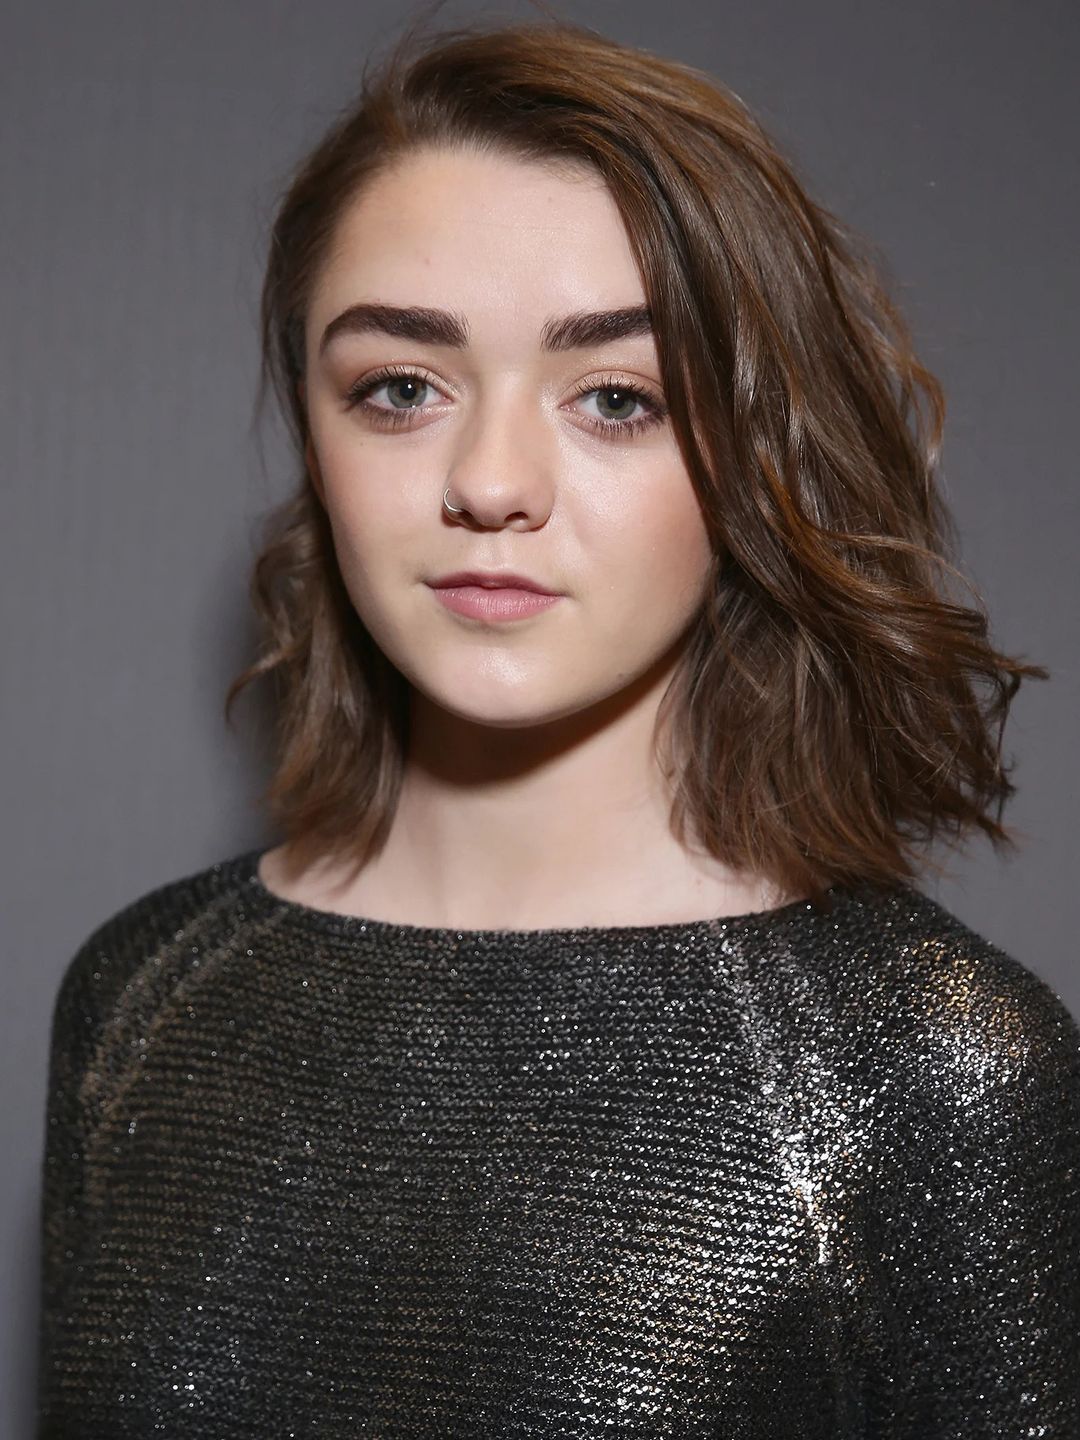 Maisie Williams how did she became famous